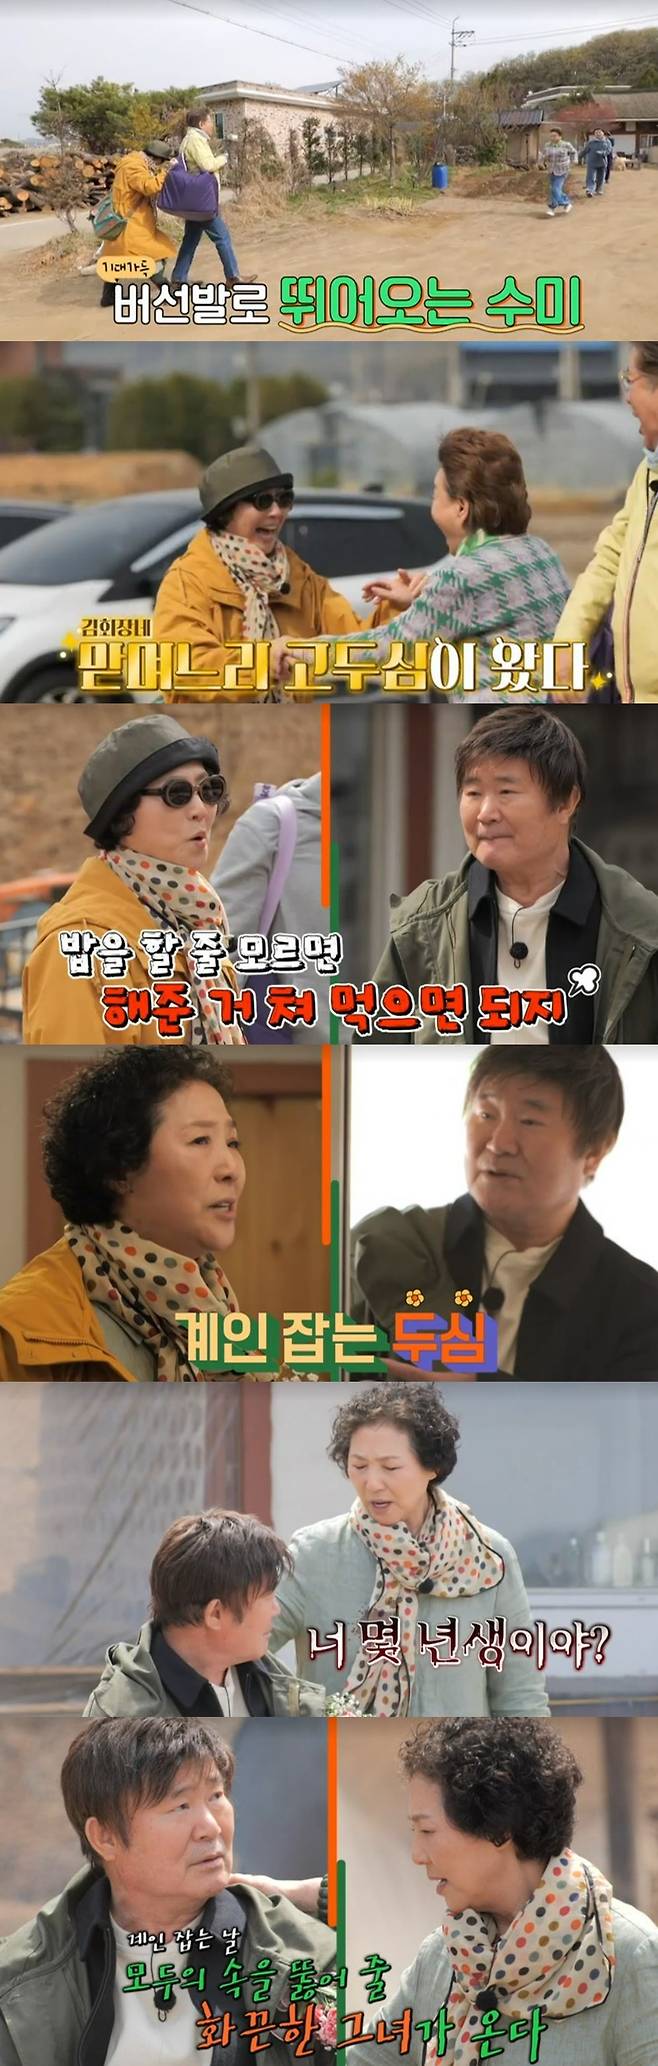 Actor Go Doo-shim takes control of Chairpersons peopleTVN STORY entertainment broadcasted on May 1  ⁇  Chairperson In your people  ⁇ , Go Doo-shim, the eldest daughter-in-law of the nation, who is going to be a guest next week, was announced.At the end of the broadcast, Go Doo-shim showed a fluttering heart and a heavy burden to visit the Chairpersons people family. Go Doo-shim, who was Kim Chairpersons first daughter-in-law at the time of Power Diary.He walked along the road with Kim Yong-geon and was surprised to appear in front of Kim Soo-mi and Lee Kye-in.Go Doo-shim then laughed with a charisma to catch Lee Kye-in. He called Lee Kye-in Kye-pal and said, If you do not know how to cook,I do not know if the rice is tasty or not, he said, nagging at Johana.Go Doo-shim also laughed at Lee Kye-in, saying, Youre old enough to take care of yourself. Are you a child? New, and added, How old are you? Lee Kye-in said,I said, A few times, and it caught my eye.Meanwhile, Go Doo-shim was born in 1951 and is 73 years old. Lee Kye-in was born in 1952 and is one year younger.Go Doo-shim has appeared in an entertainment and has been acquainted with Friend Lee Kye-in in 48 years, revealing that Lee Kye-in never calls sister.At the time, Lee Kye-in said, Whats wrong with being one year older? Its not even a question. Some of my friends are five years older than me.